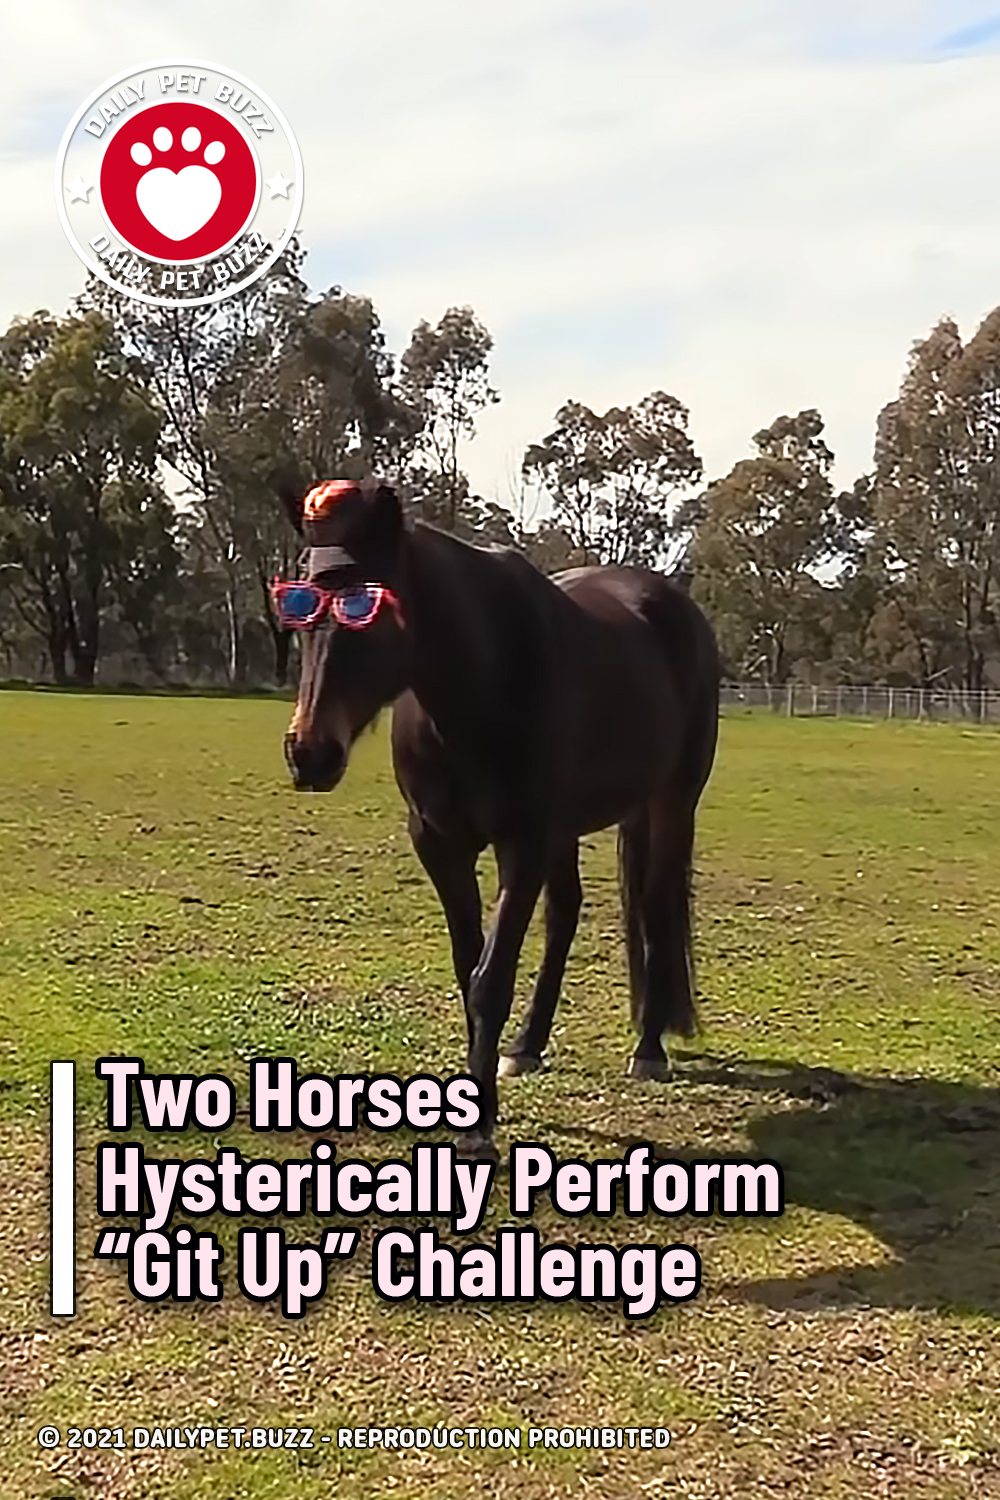 Two Horses Hysterically Perform “Git Up” Challenge